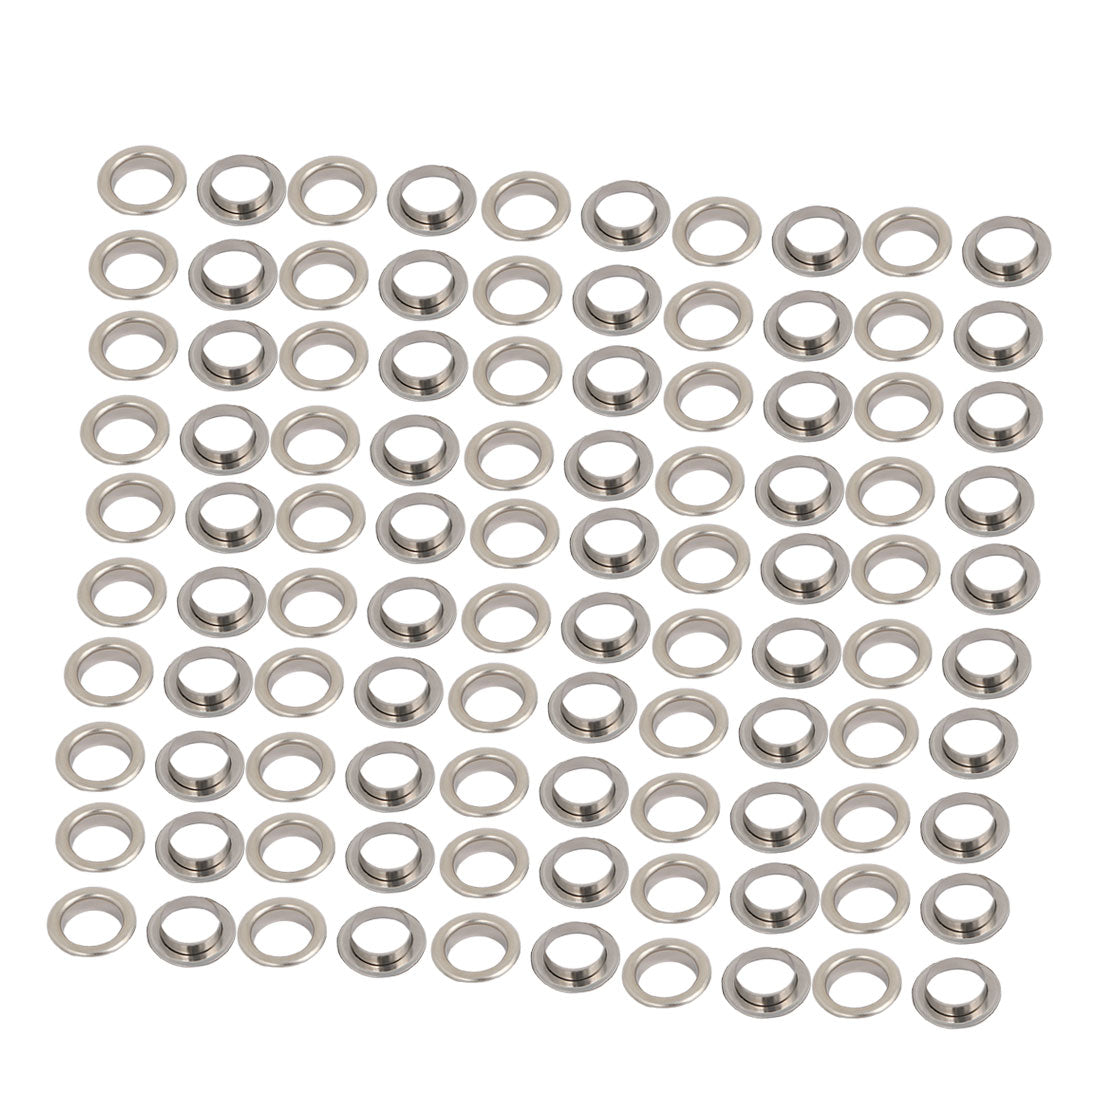 uxcell Uxcell 100pcs 10mm Brass Eyelet Grommets Silver Tone for Clothes Leather Canvas